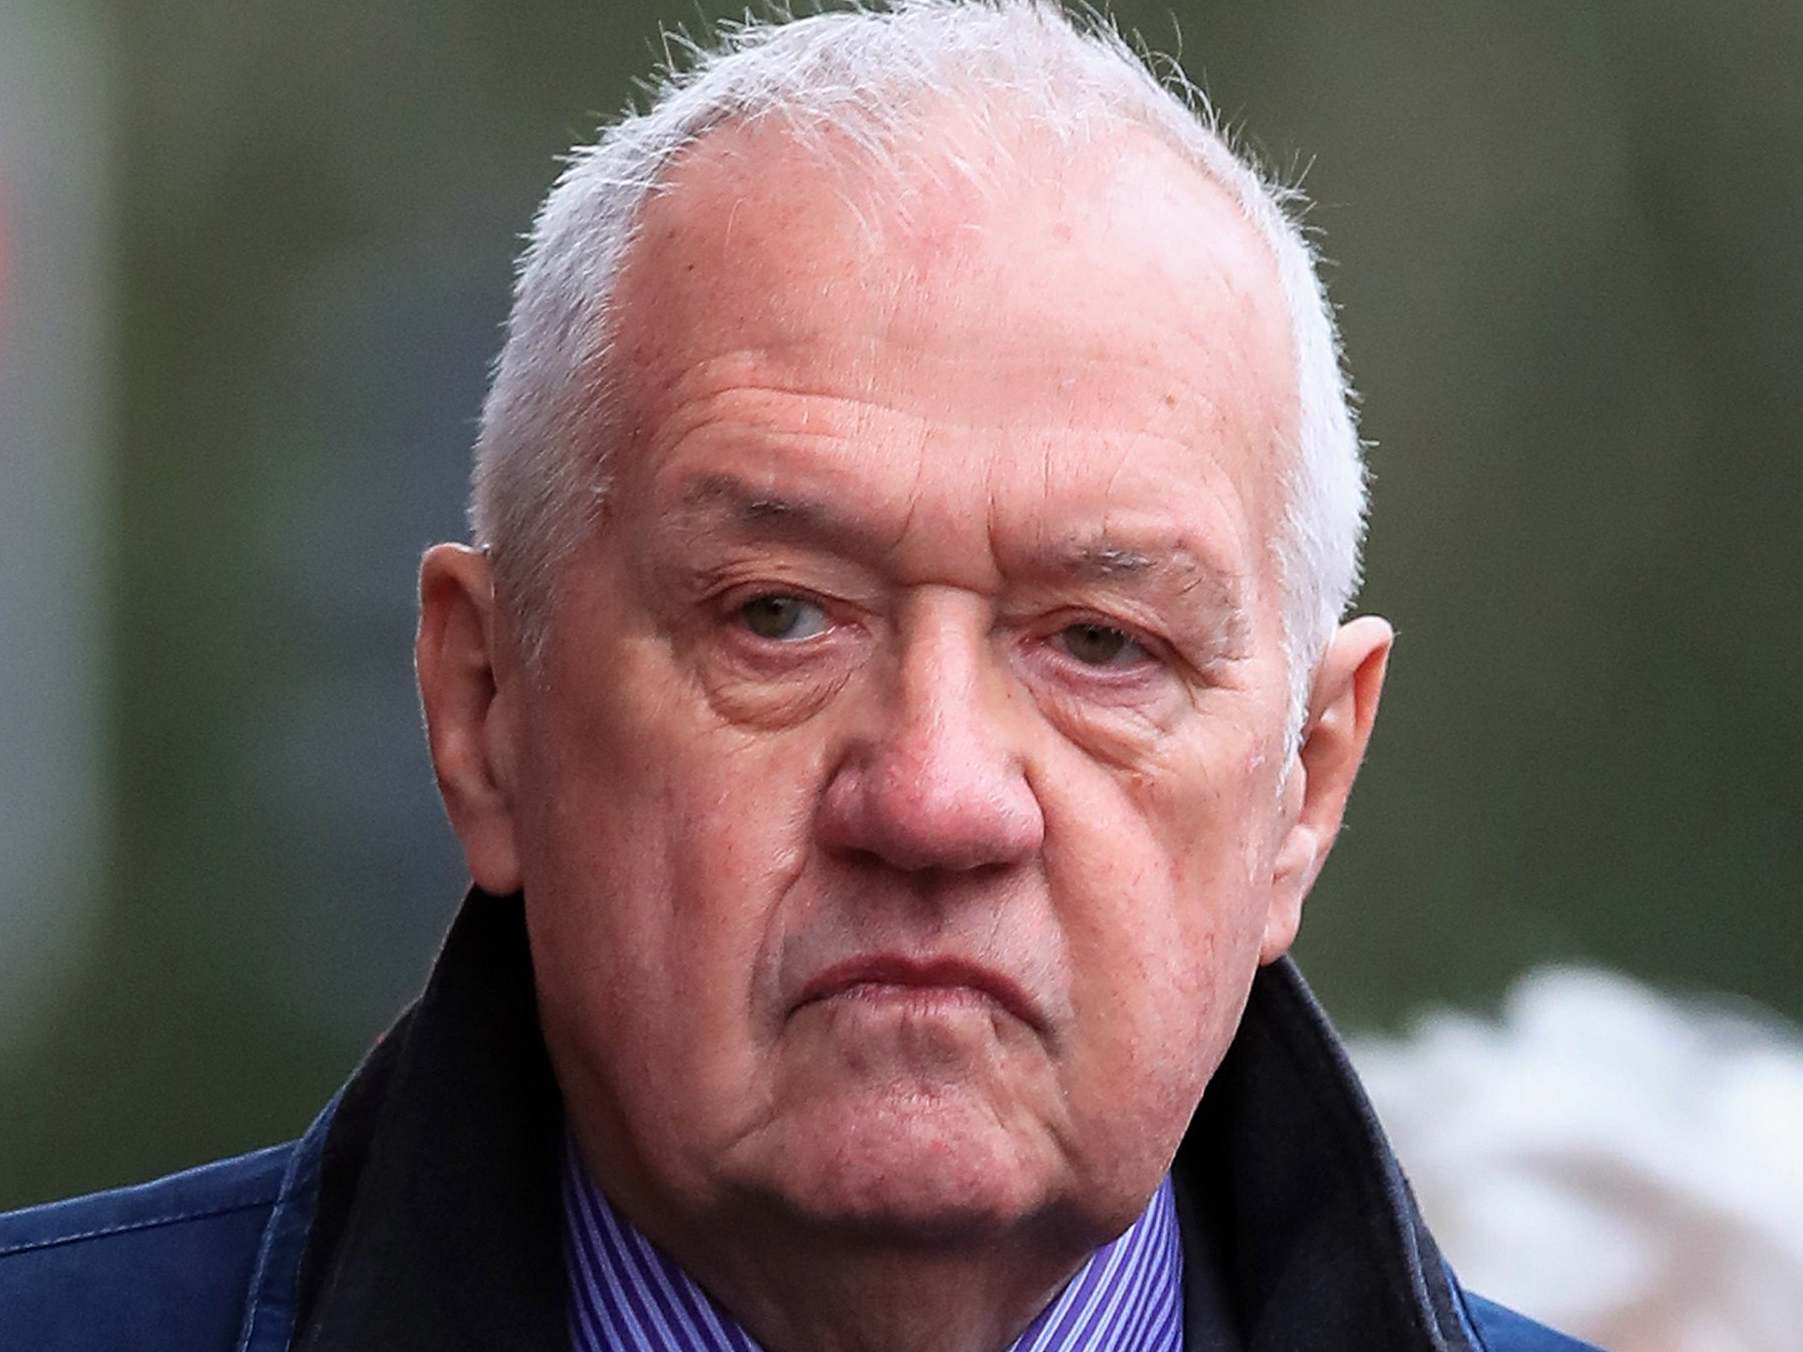 Hillsborough match commander David Duckenfield, who is accused of the manslaughter by gross negligence of 95 Liverpool supporters in the Hillsborough disaster, arriving at Preston Crown Court on 7 October